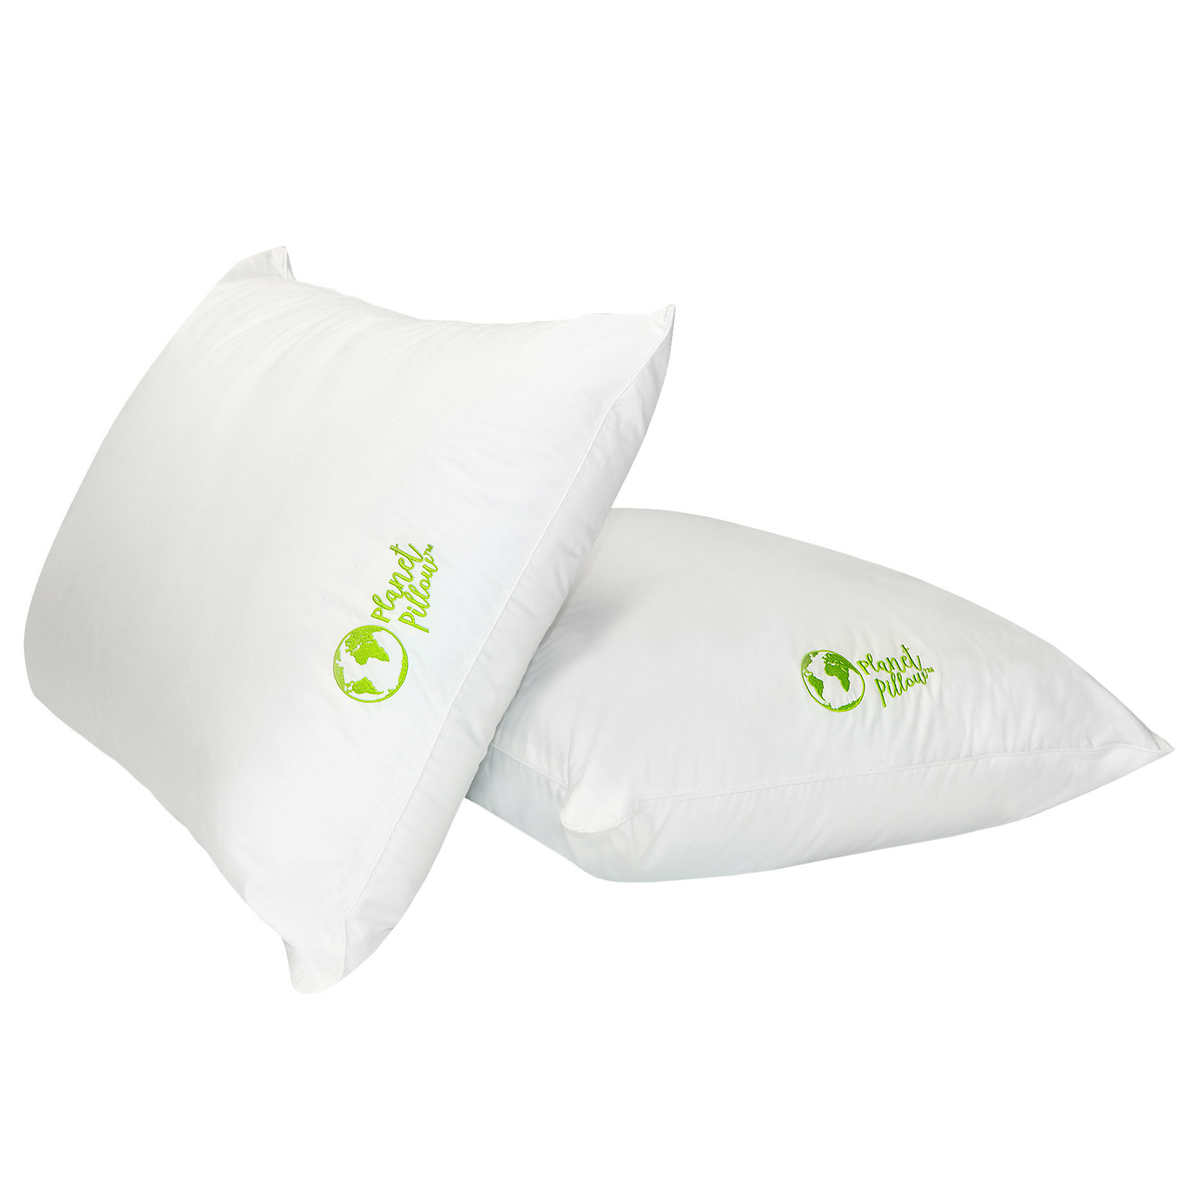 Queen Size Luxury Gel Pillow for White Side Sleepers Cooling Set of 2 Pillow 4 t-ypes 2 Size Combo Pack 16×24-16×16 Pillows for Sleeping and Insert Throw Pillow